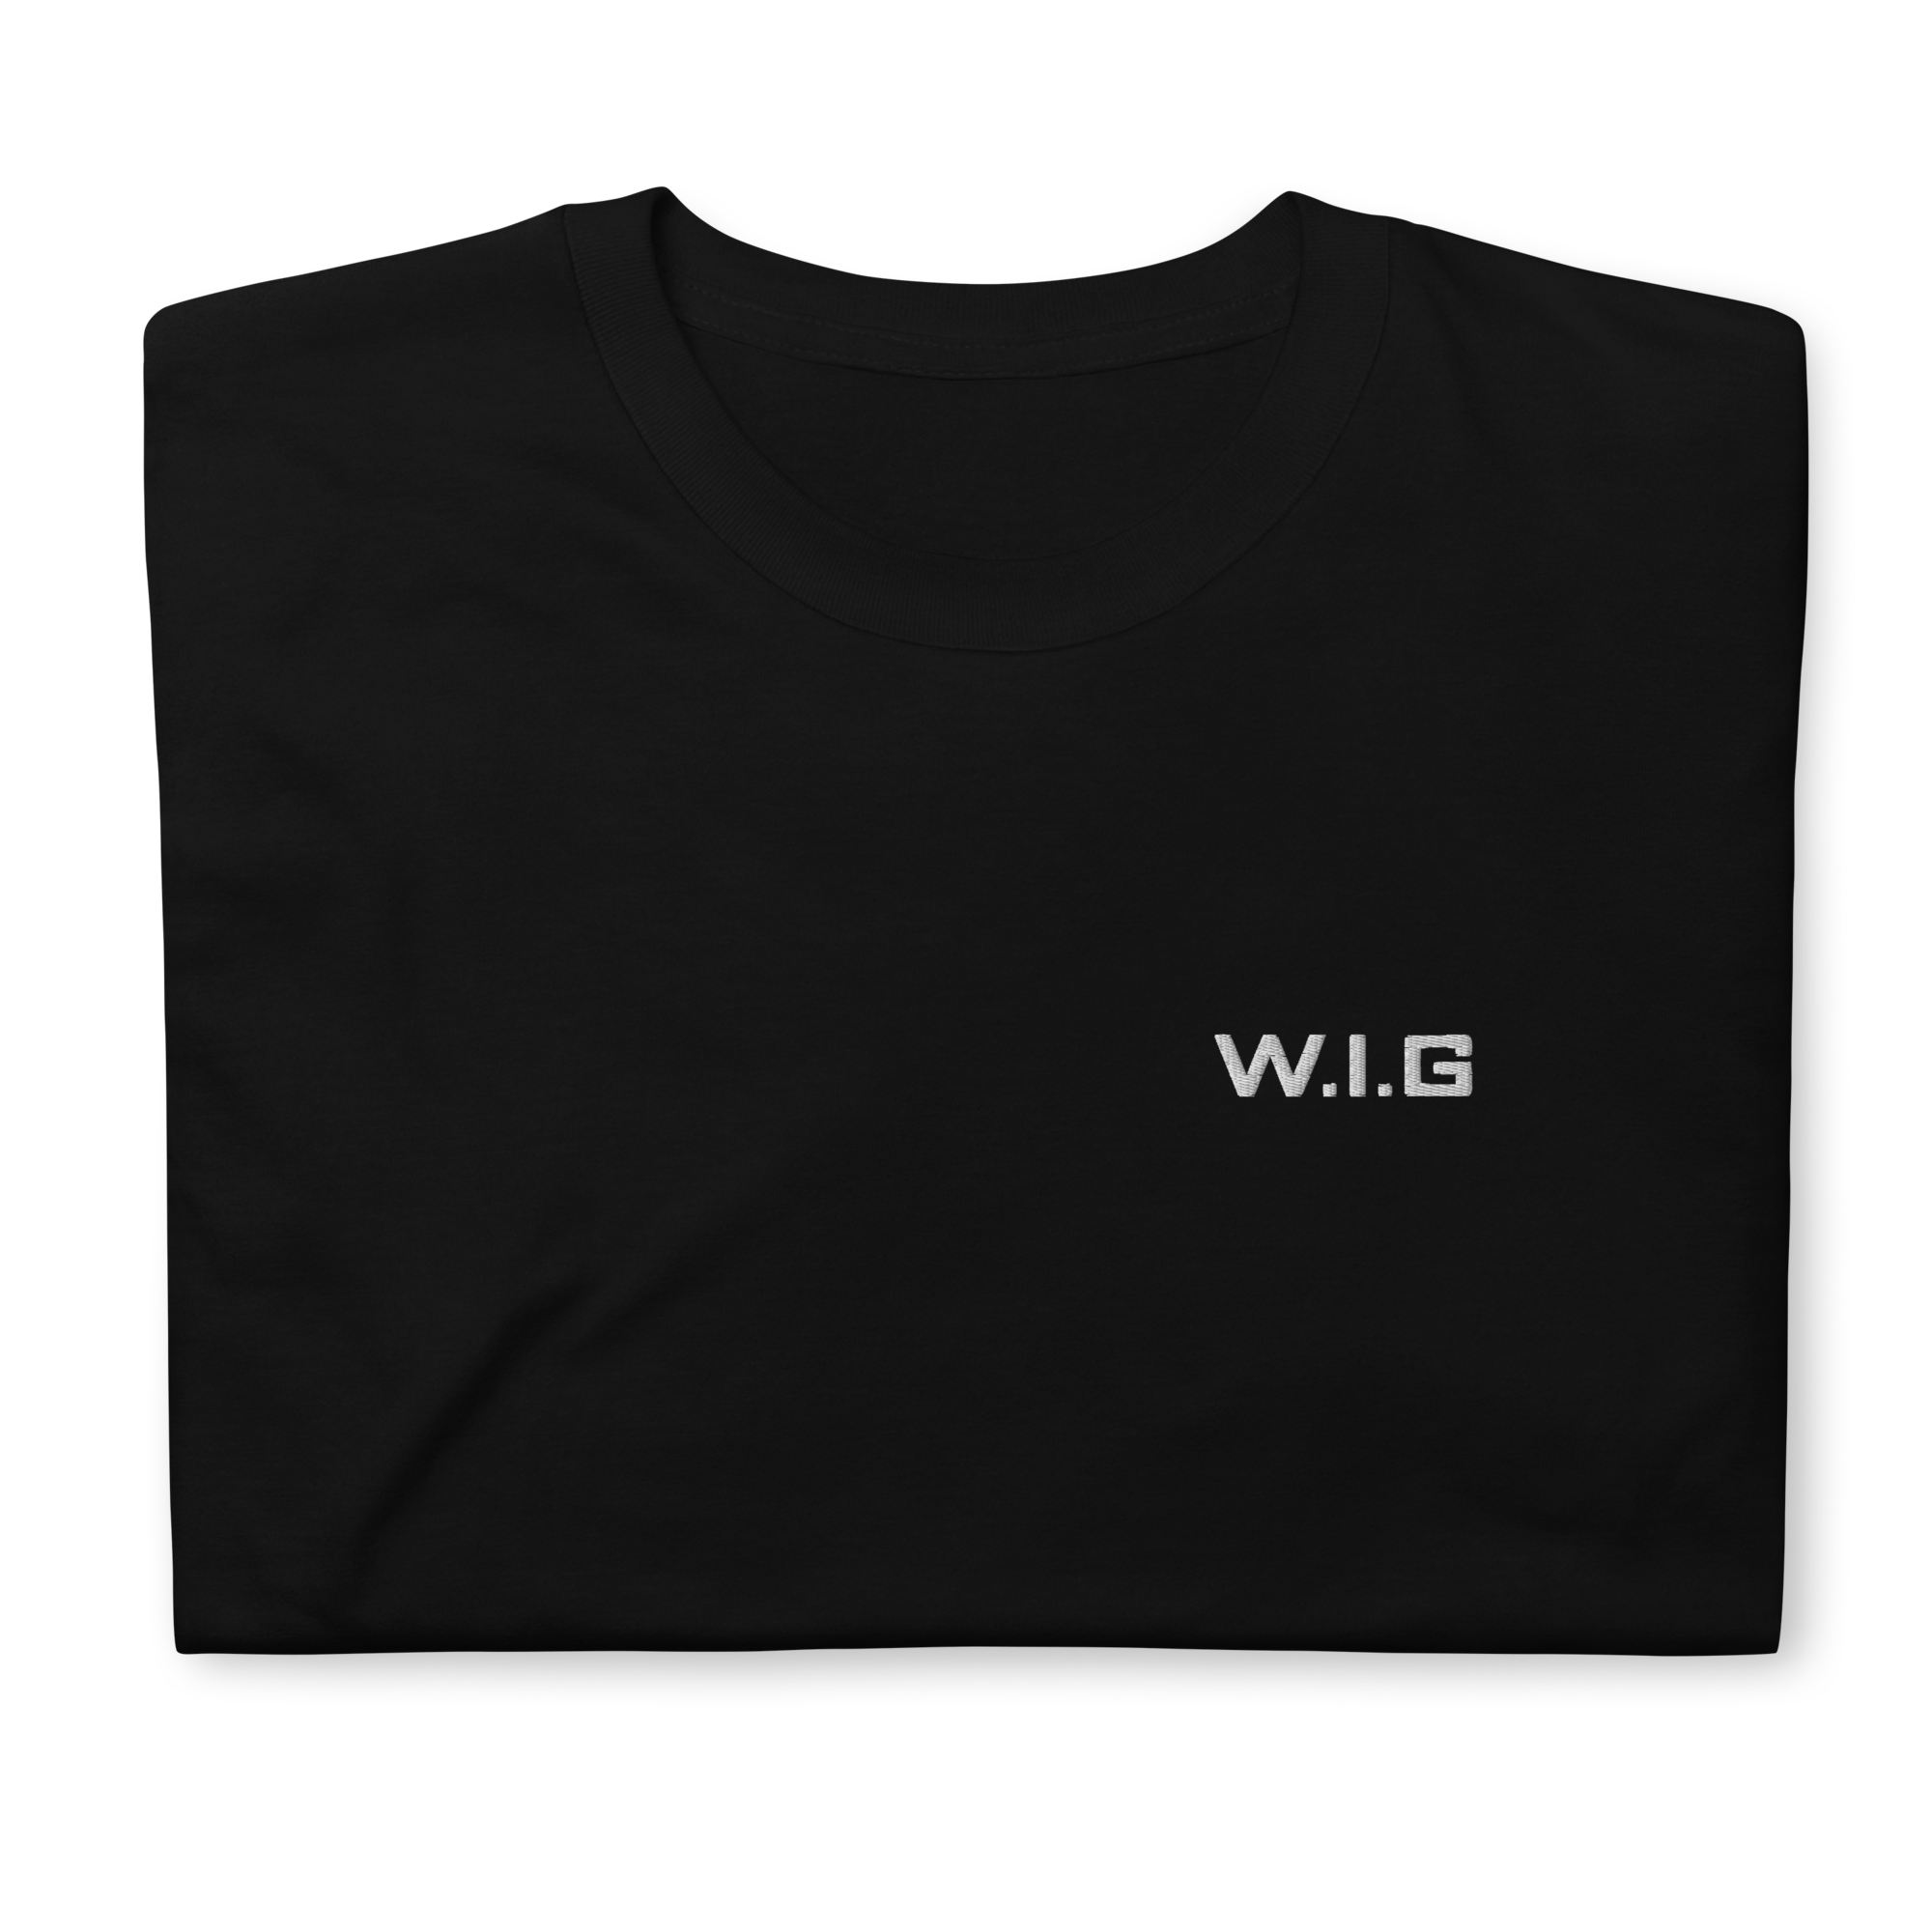 WIG embroidered t-shirt